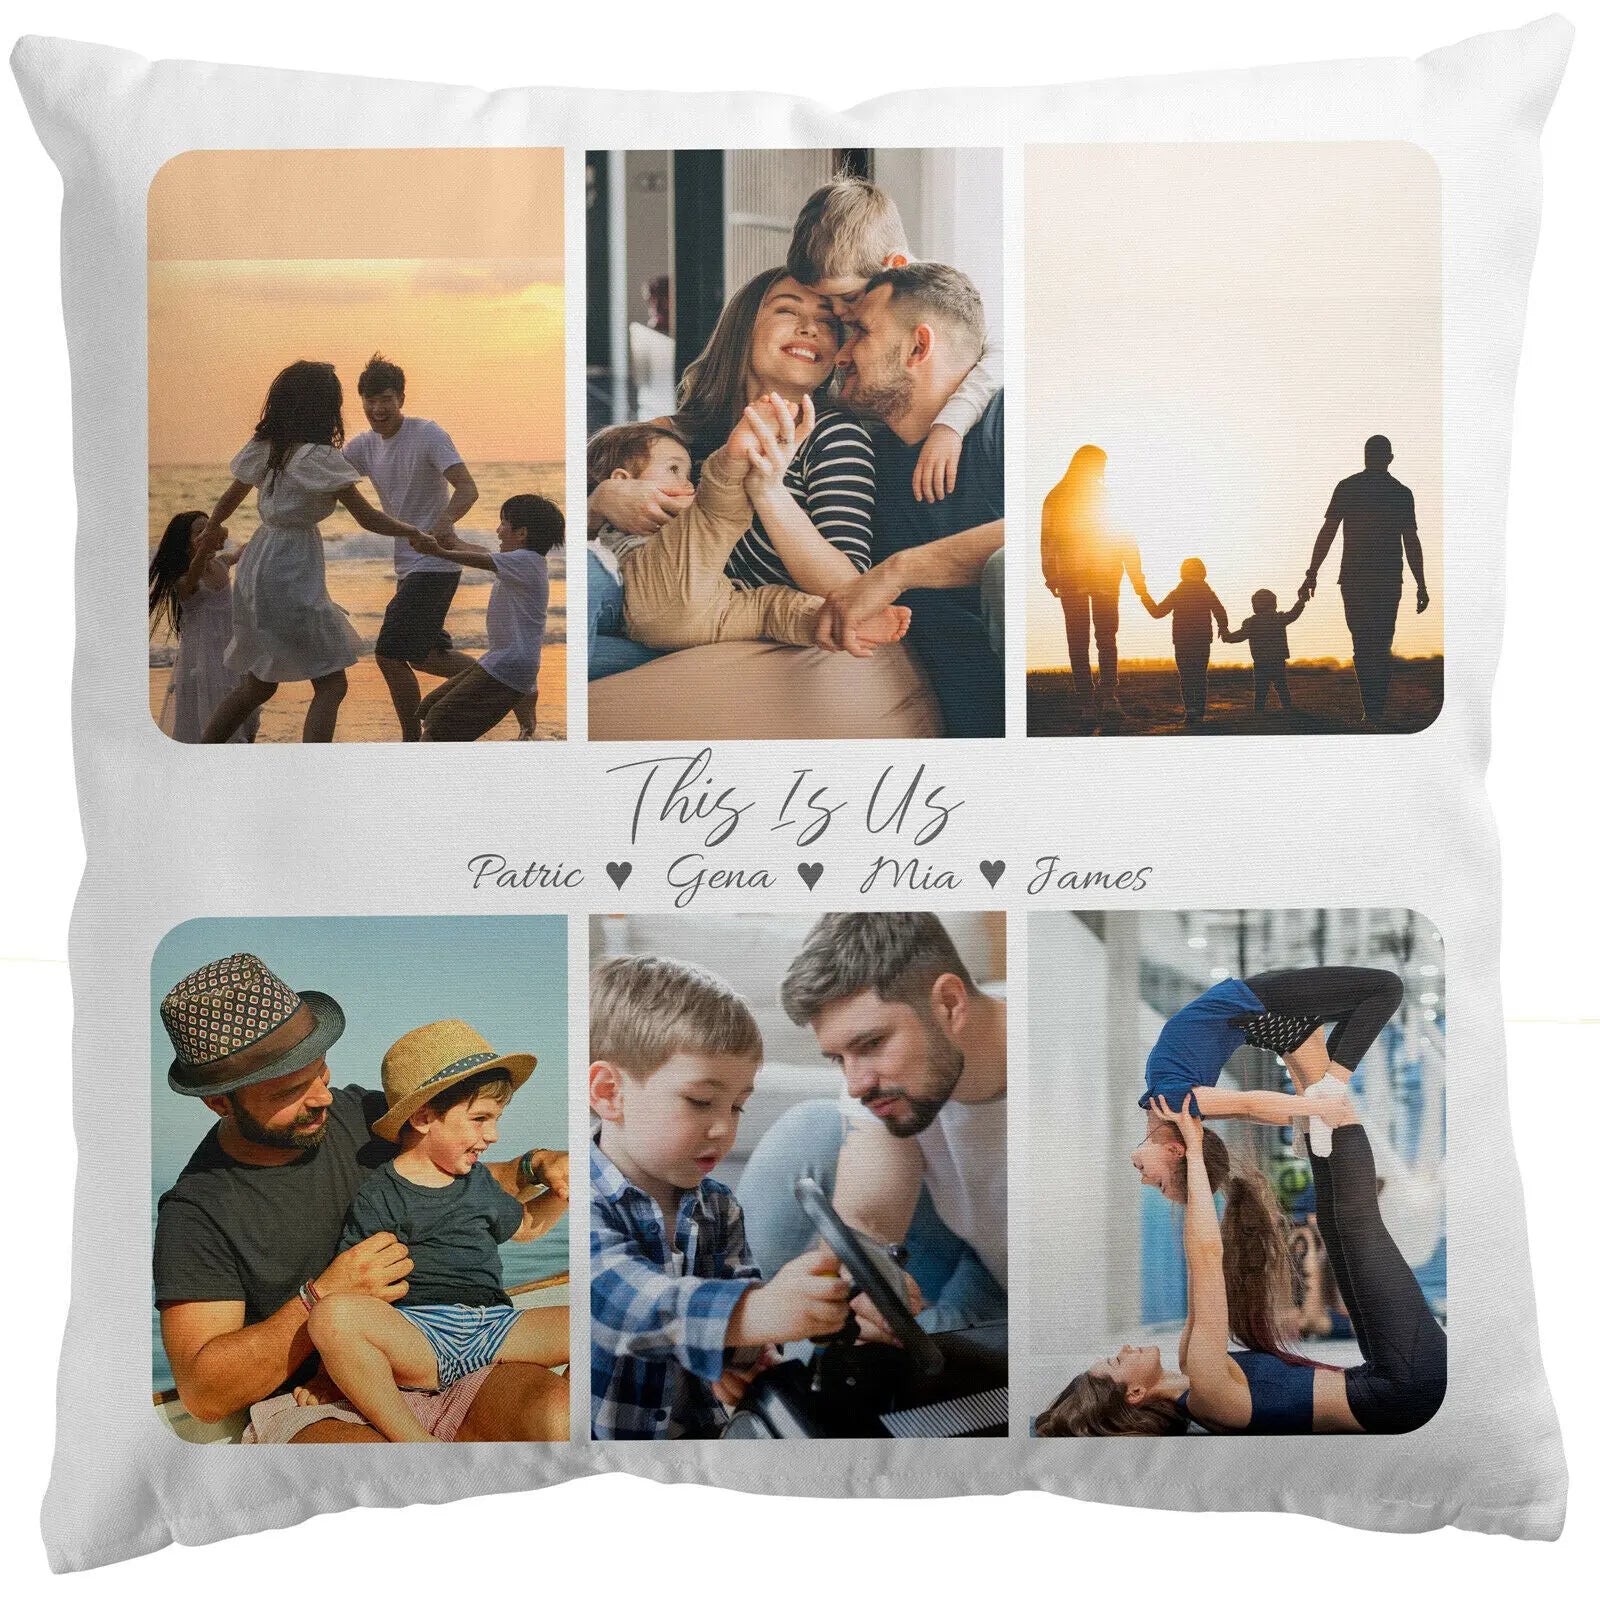 Personalised Collage Style  Cushion Cover  40x40cm  Photo Cushion - 6 Images - Messages